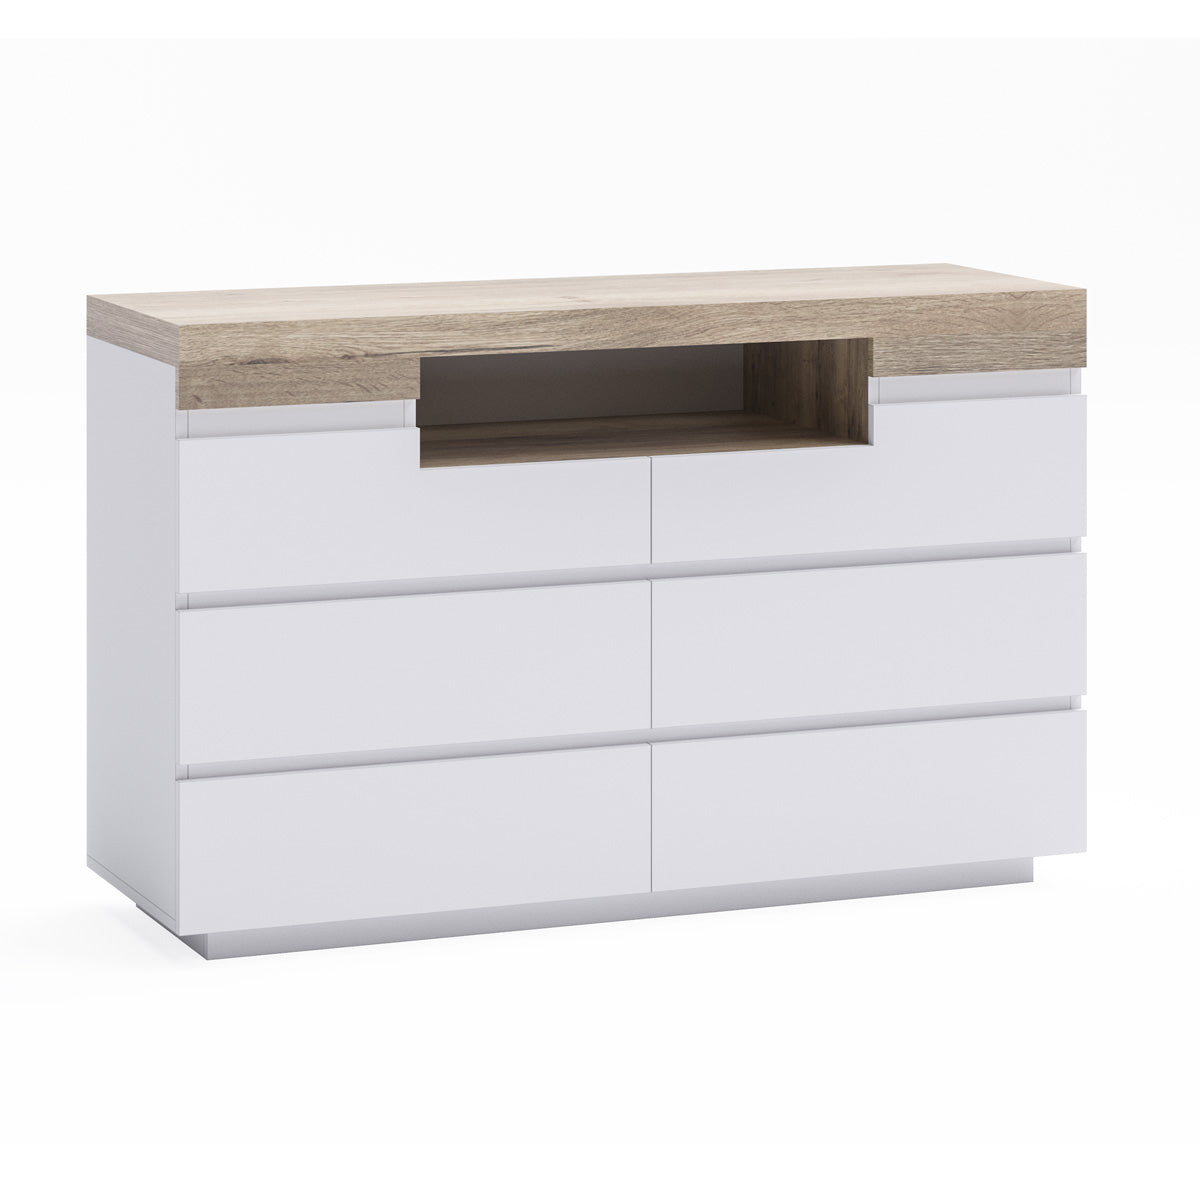 Six Drawer Lowboy Unit (Coogee Collection)